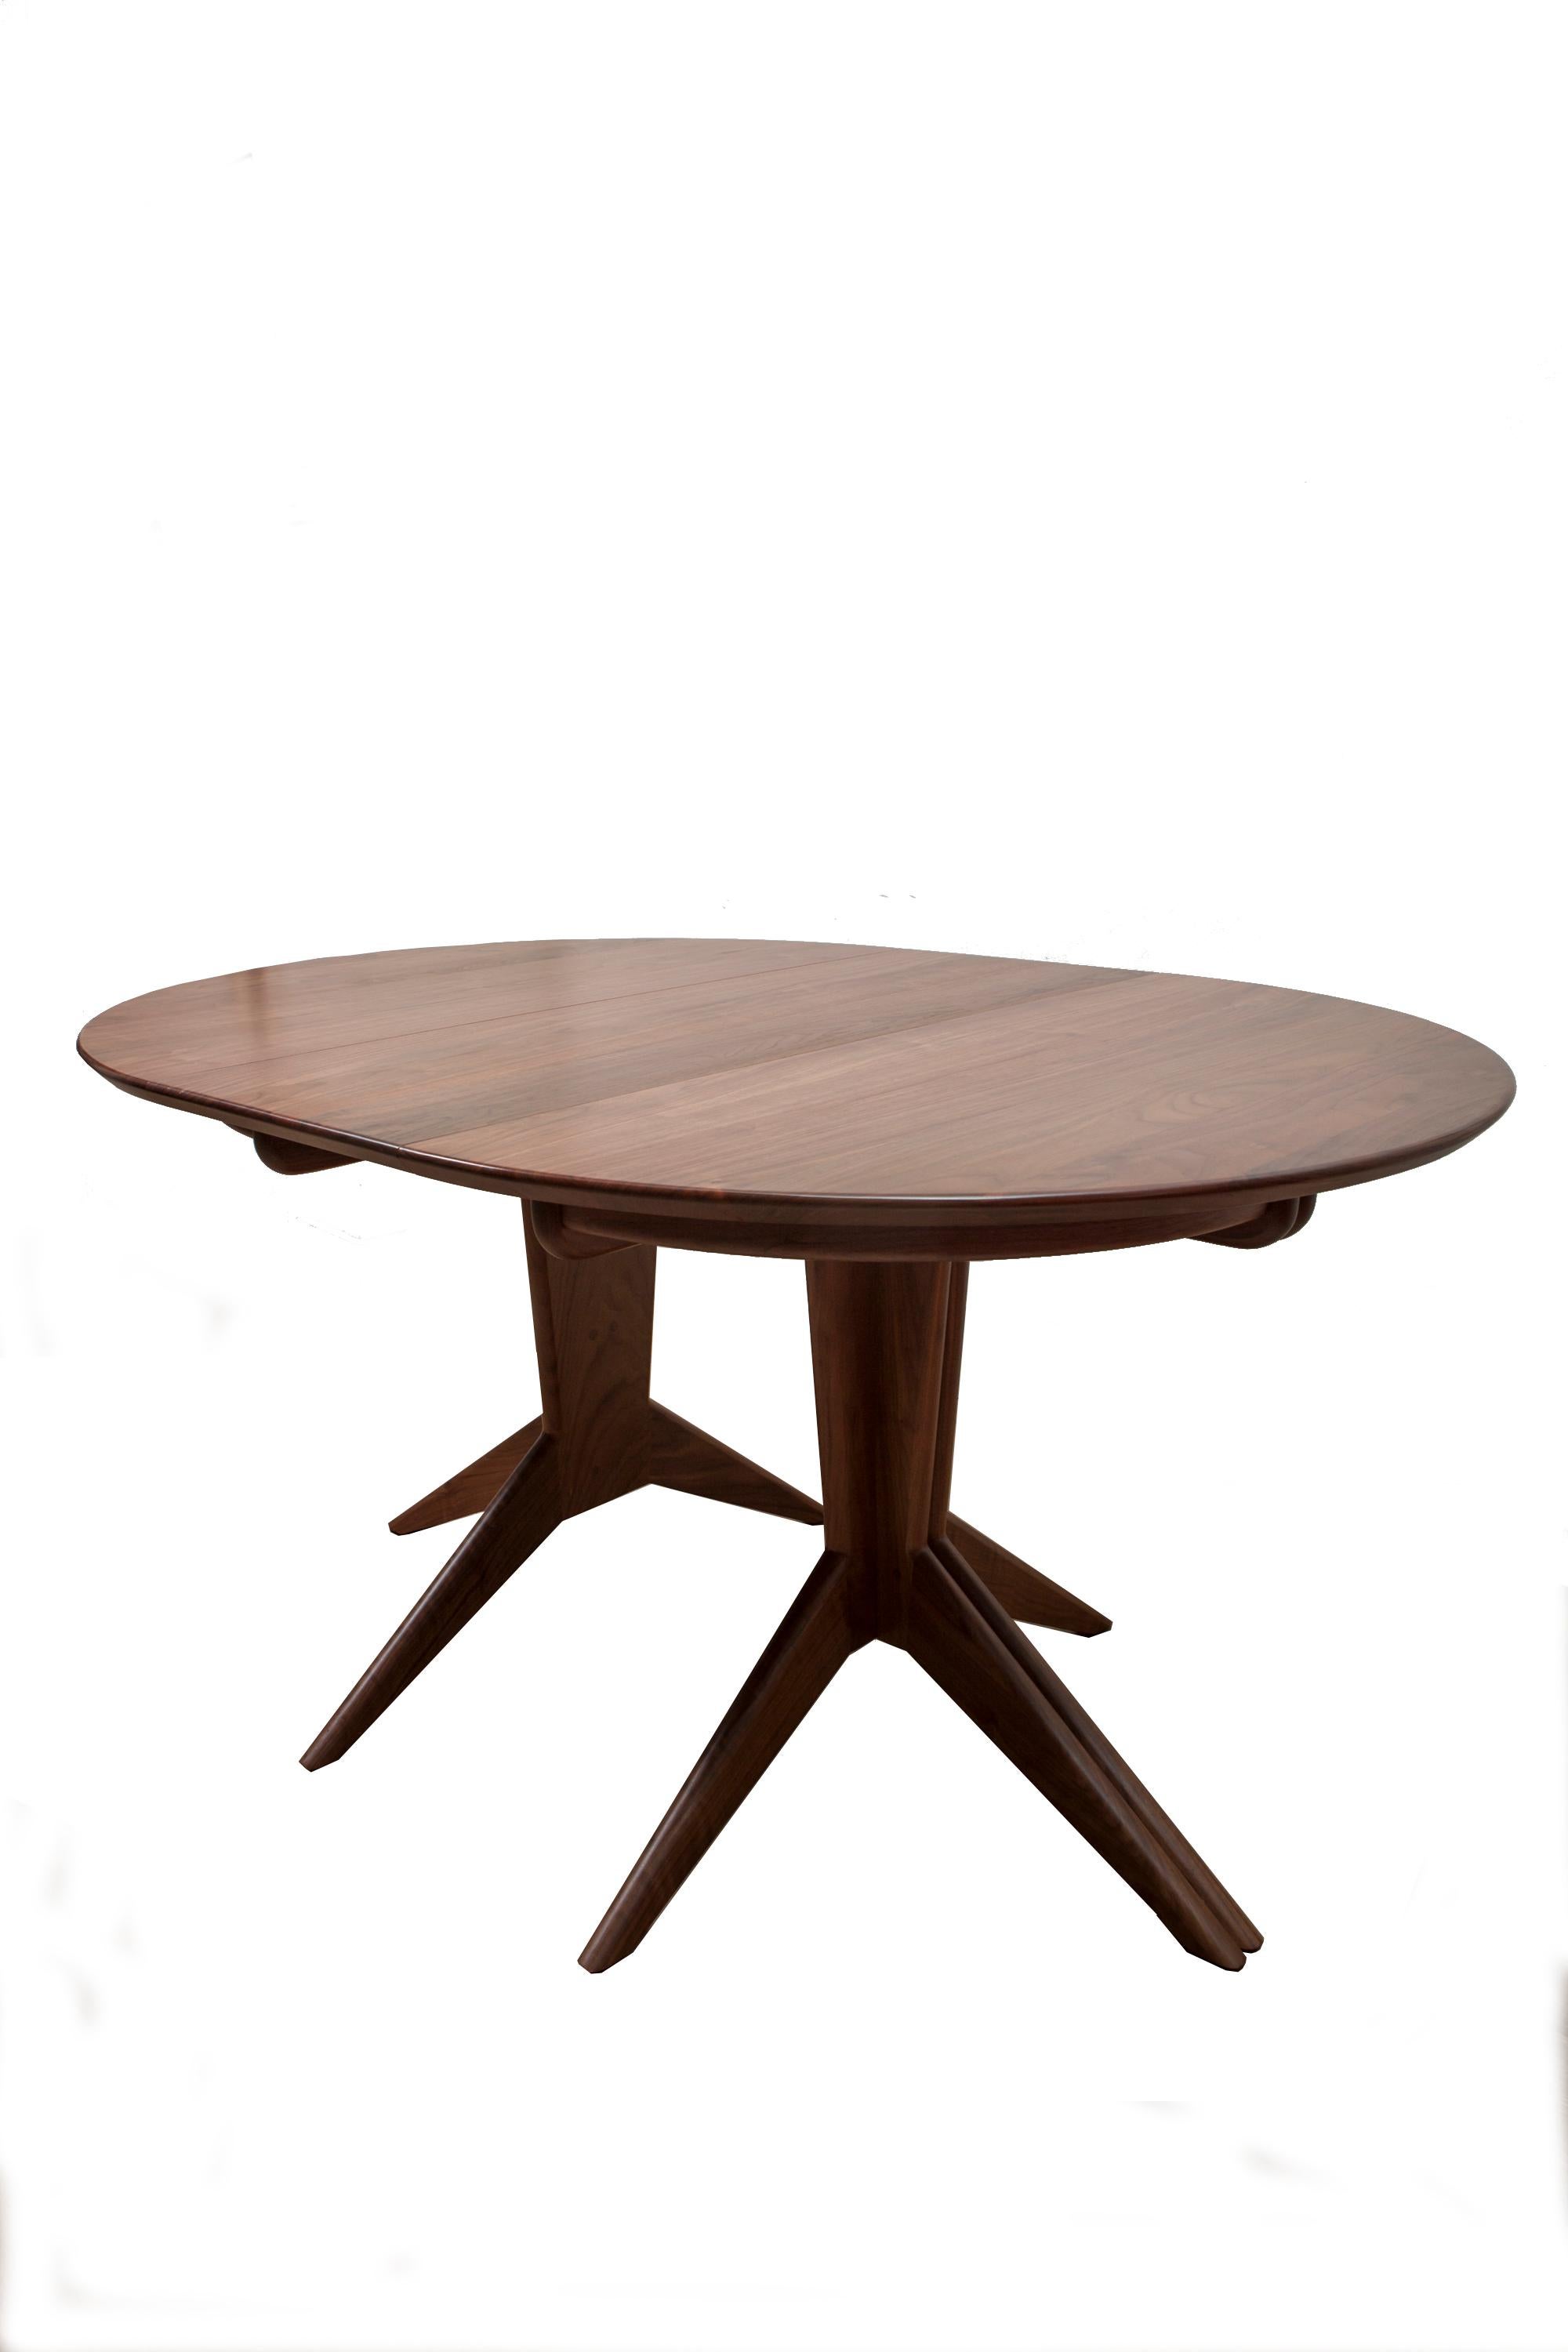 American Pedestal Extension Table in Walnut by Mel Smilow For Sale